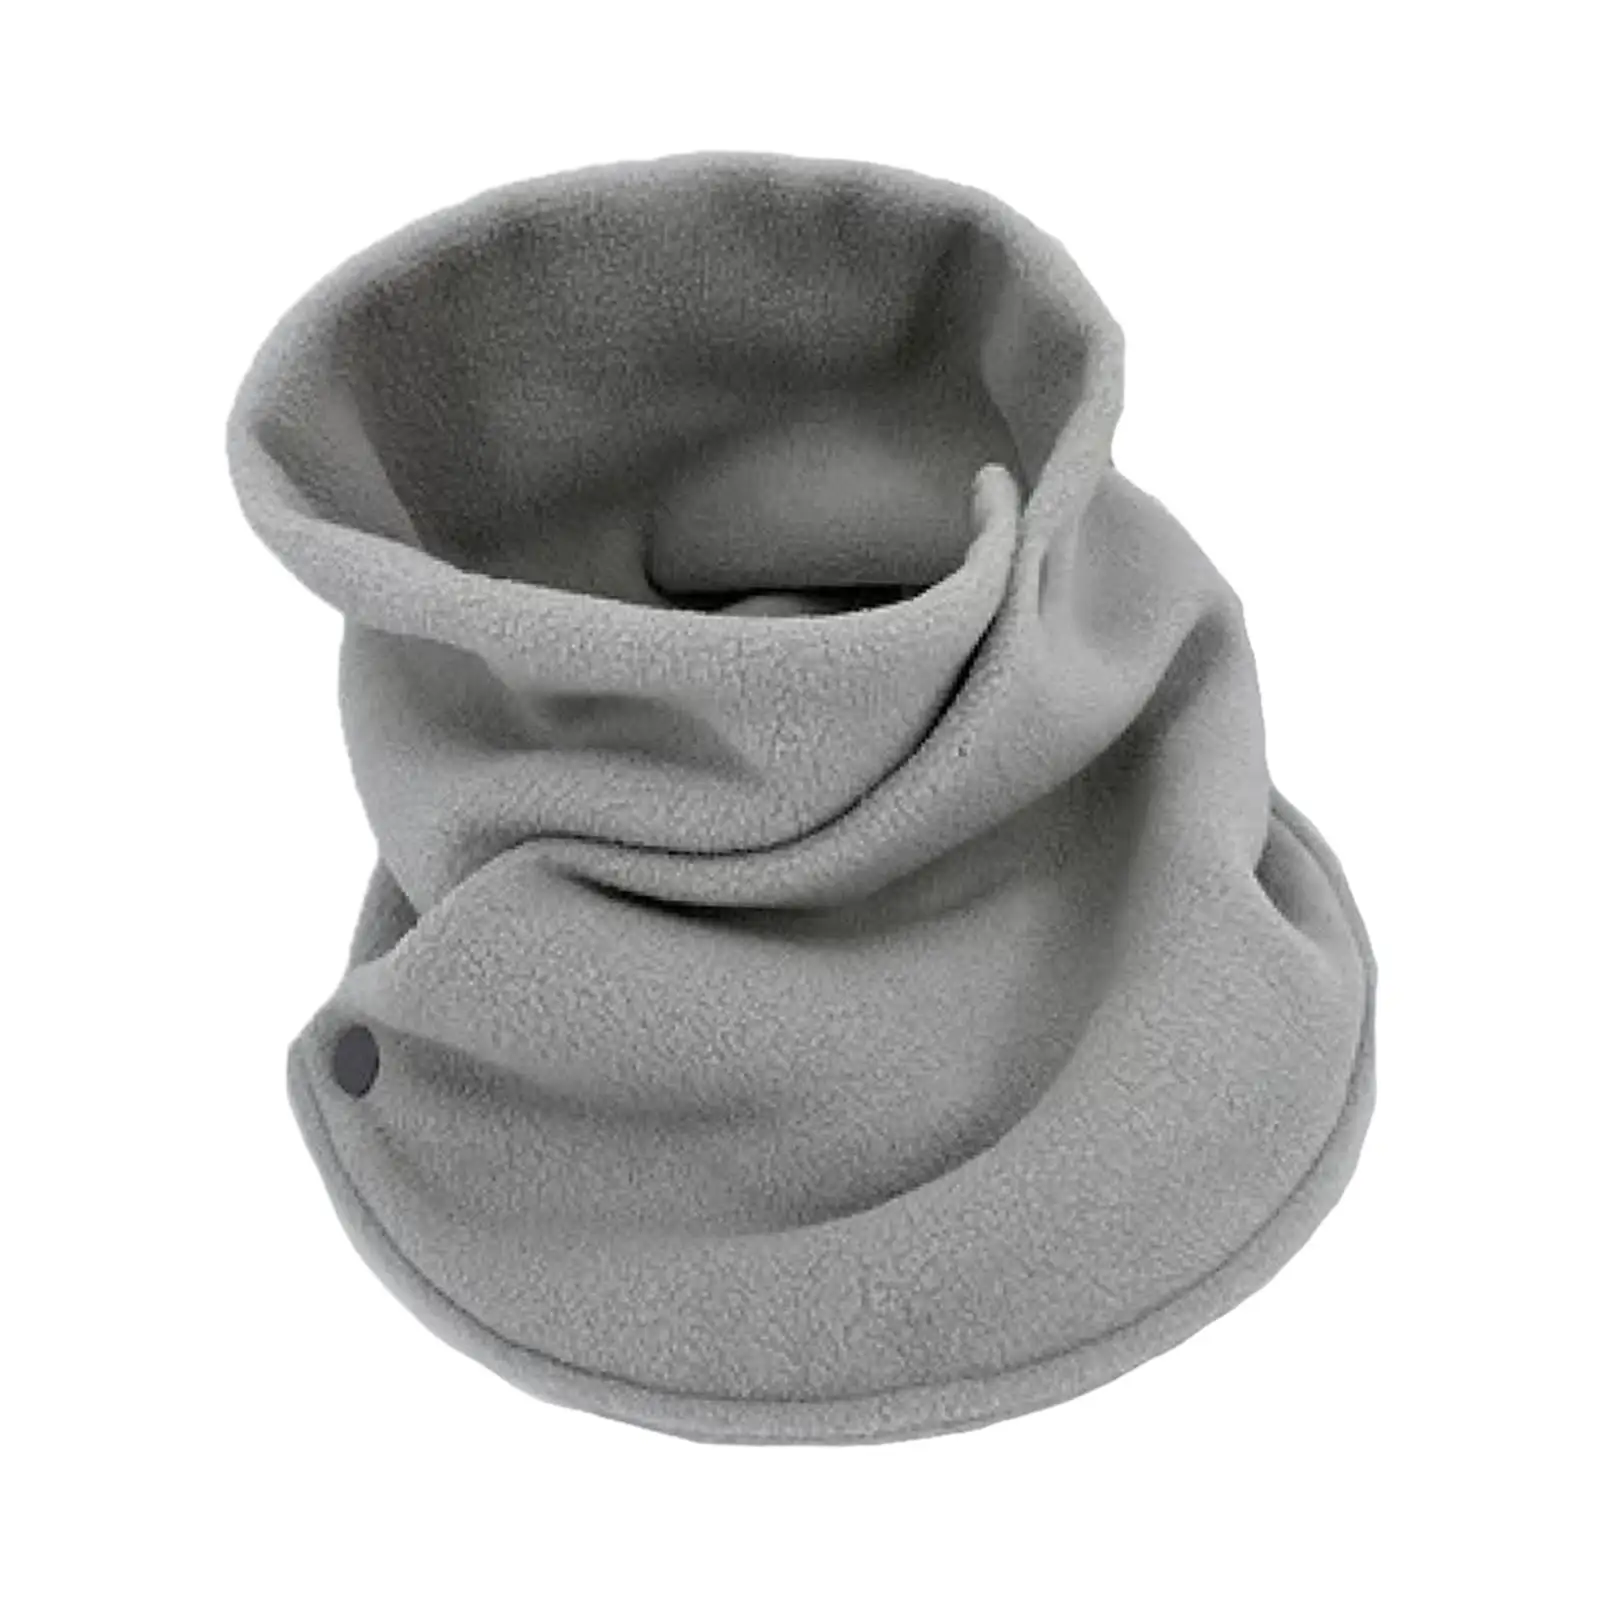 Winter Neck Gaiter Soft Fleece Multipurpose for Women Thermal Warm Scarf for Running Motorcycle Skiing Cold Weather Snowboarding